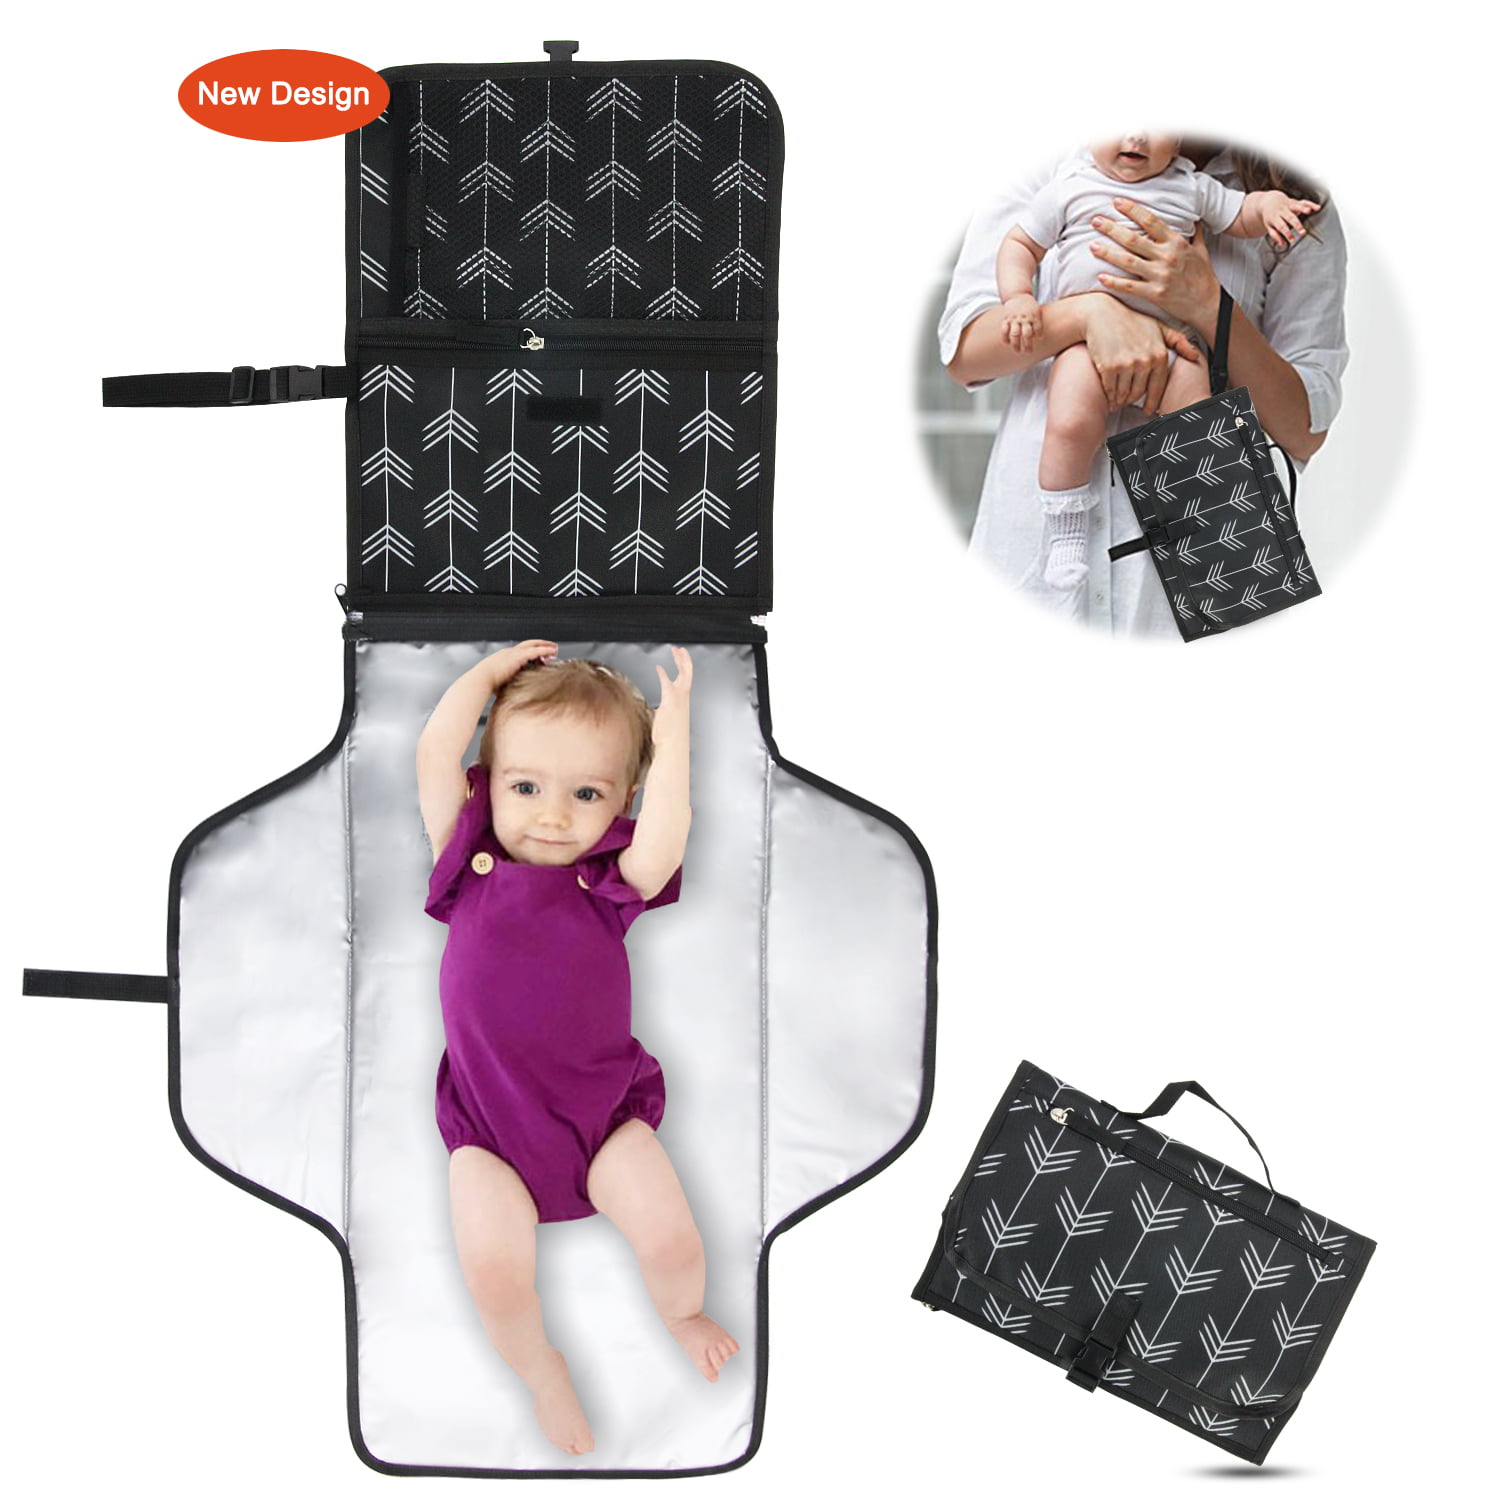 Vintage Toolik Portable Changing Pad Baby Diaper Clutch with Waterproof Infant Travel Station Kit Mat